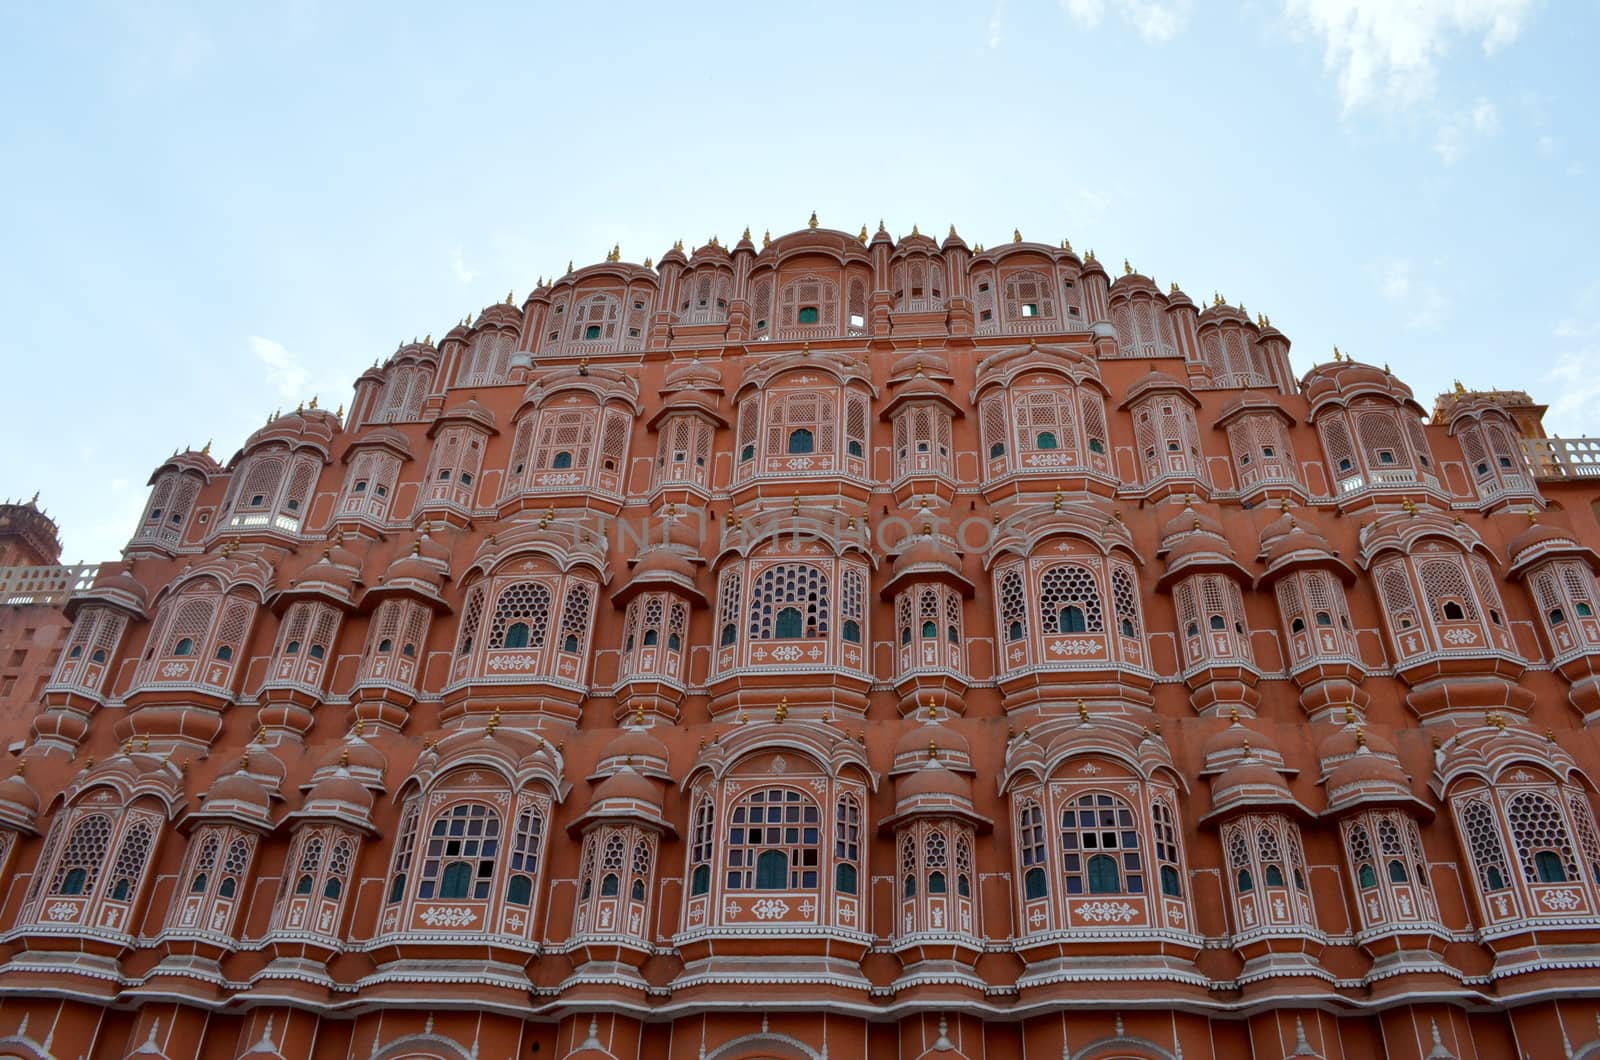 Low angle shot of Hawa Mahal from across the street. Hawa Mahal is constructed of red and pink sandstone. The structure was built in 1799 by Maharaja Sawai Pratap Singh in Jaipur, Rajasthan, India. by jayantbahel